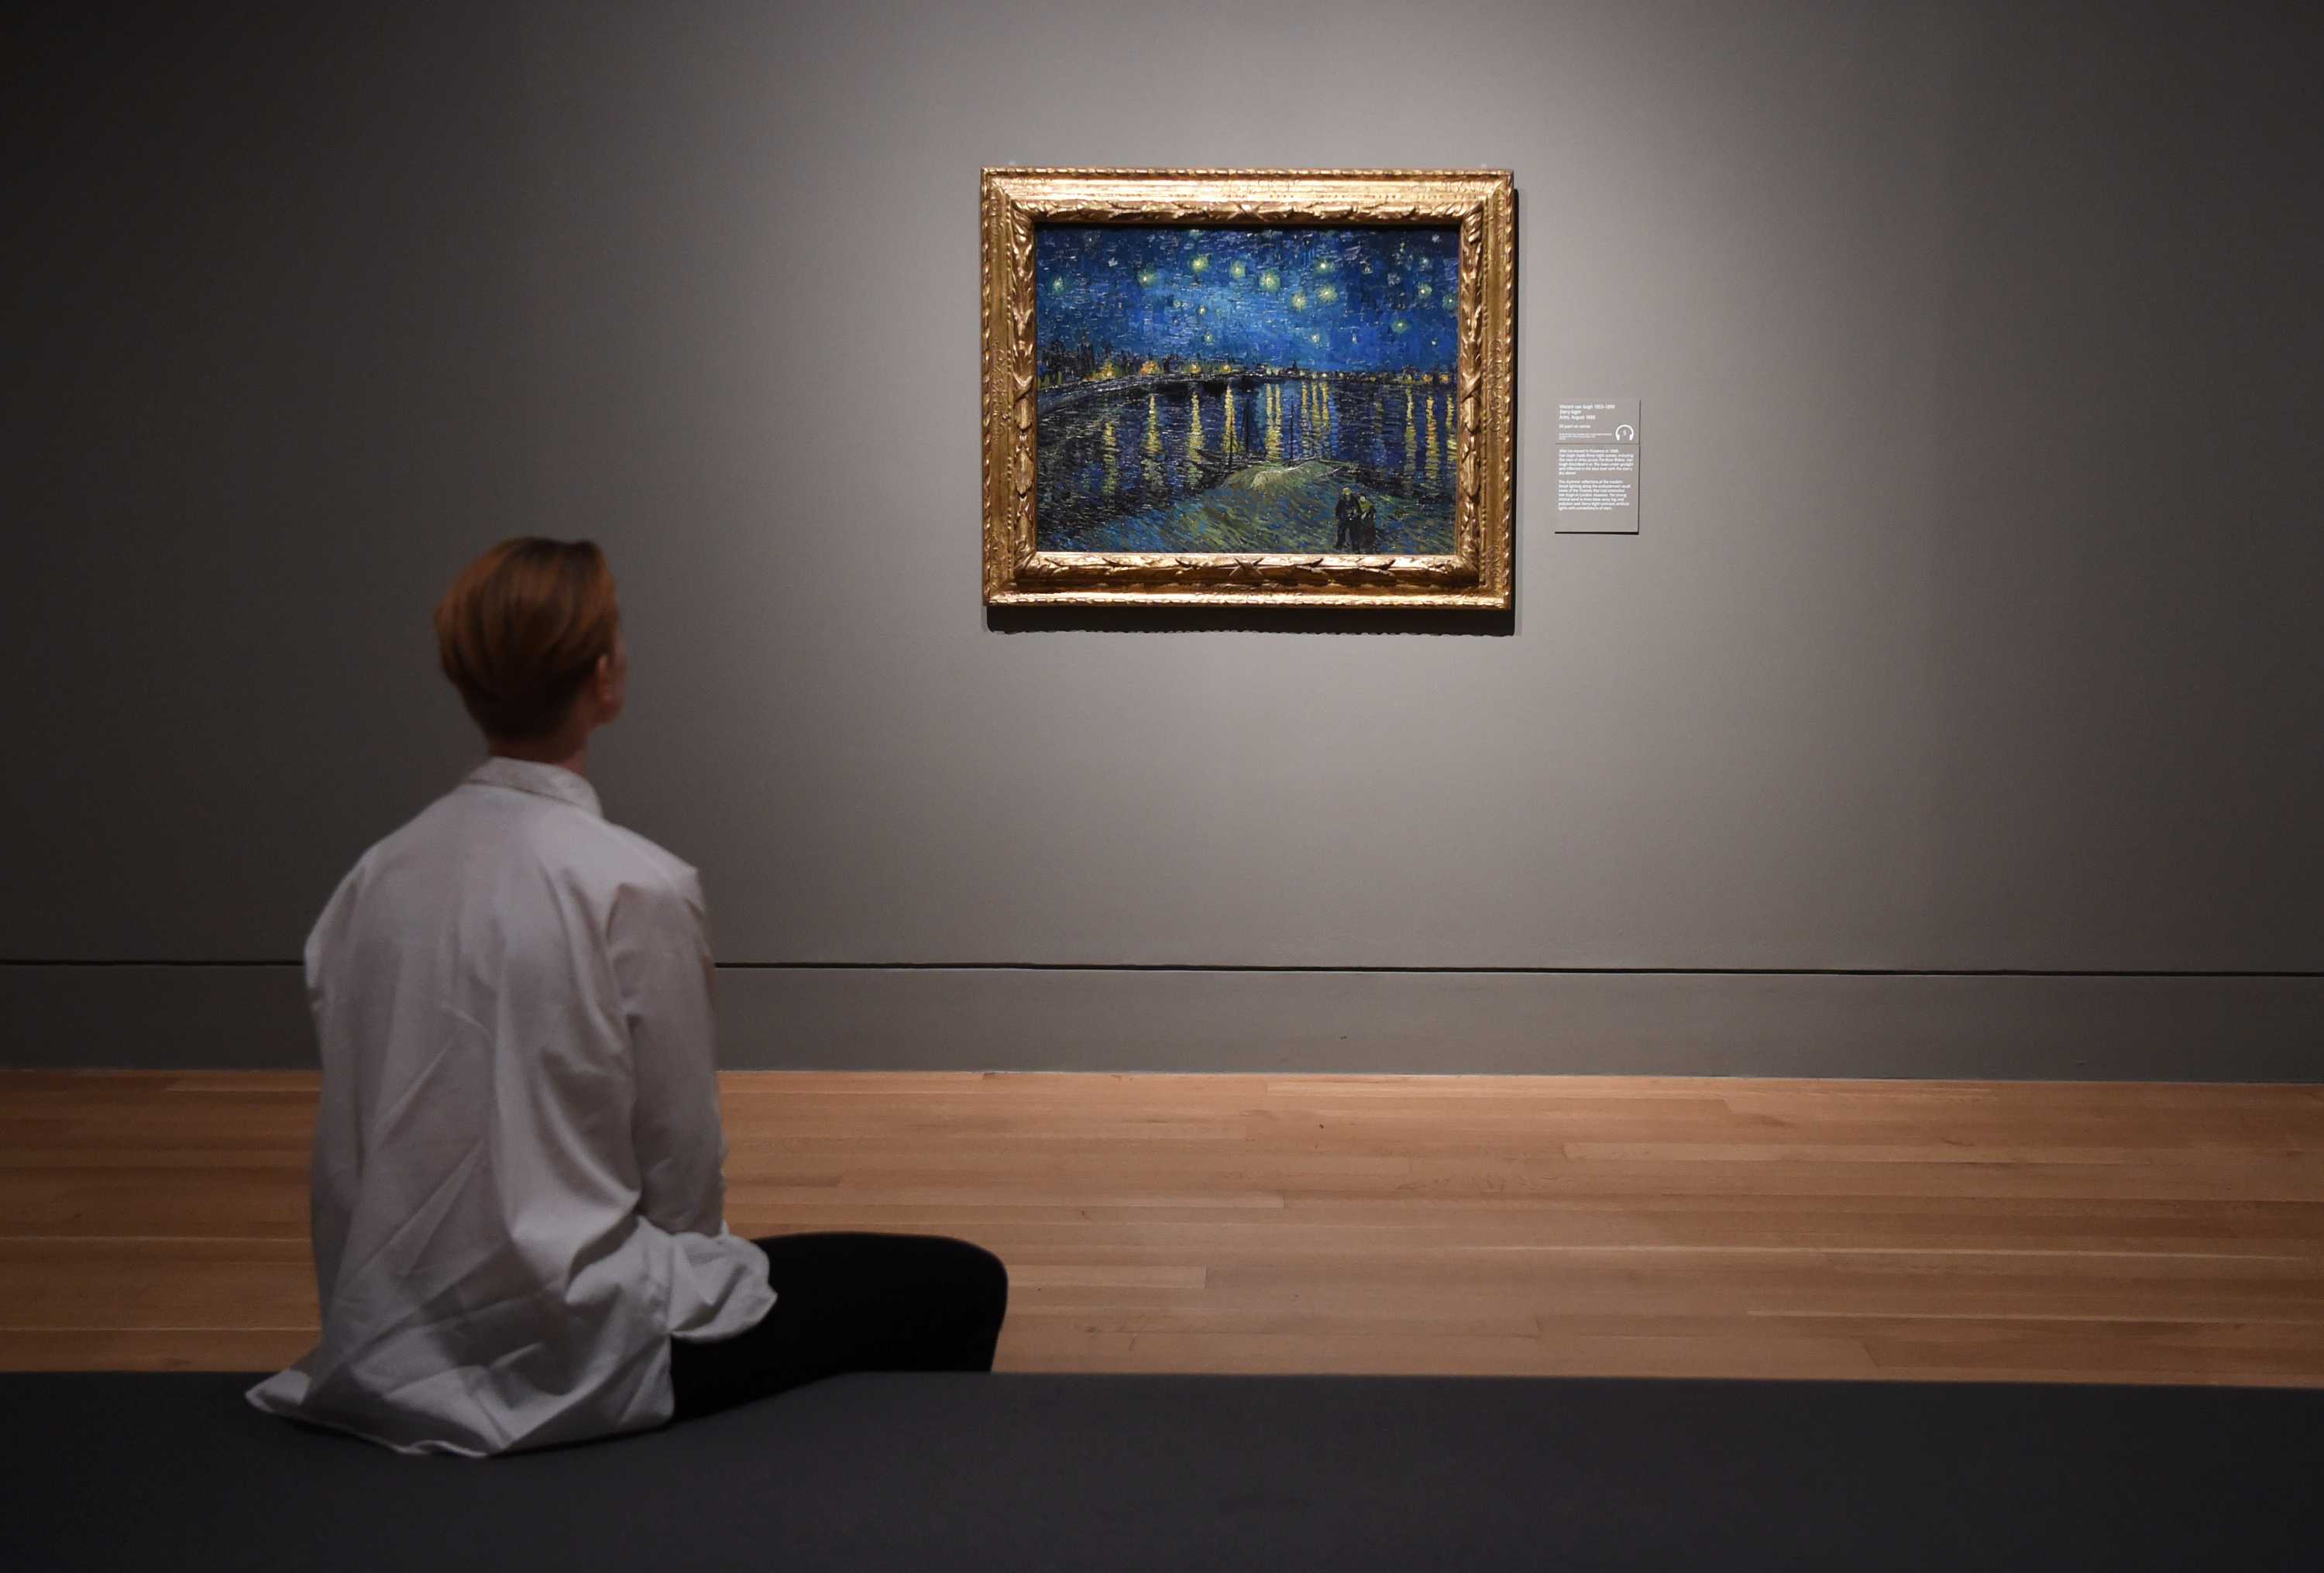 What can our experience of art tell us about the moral life?